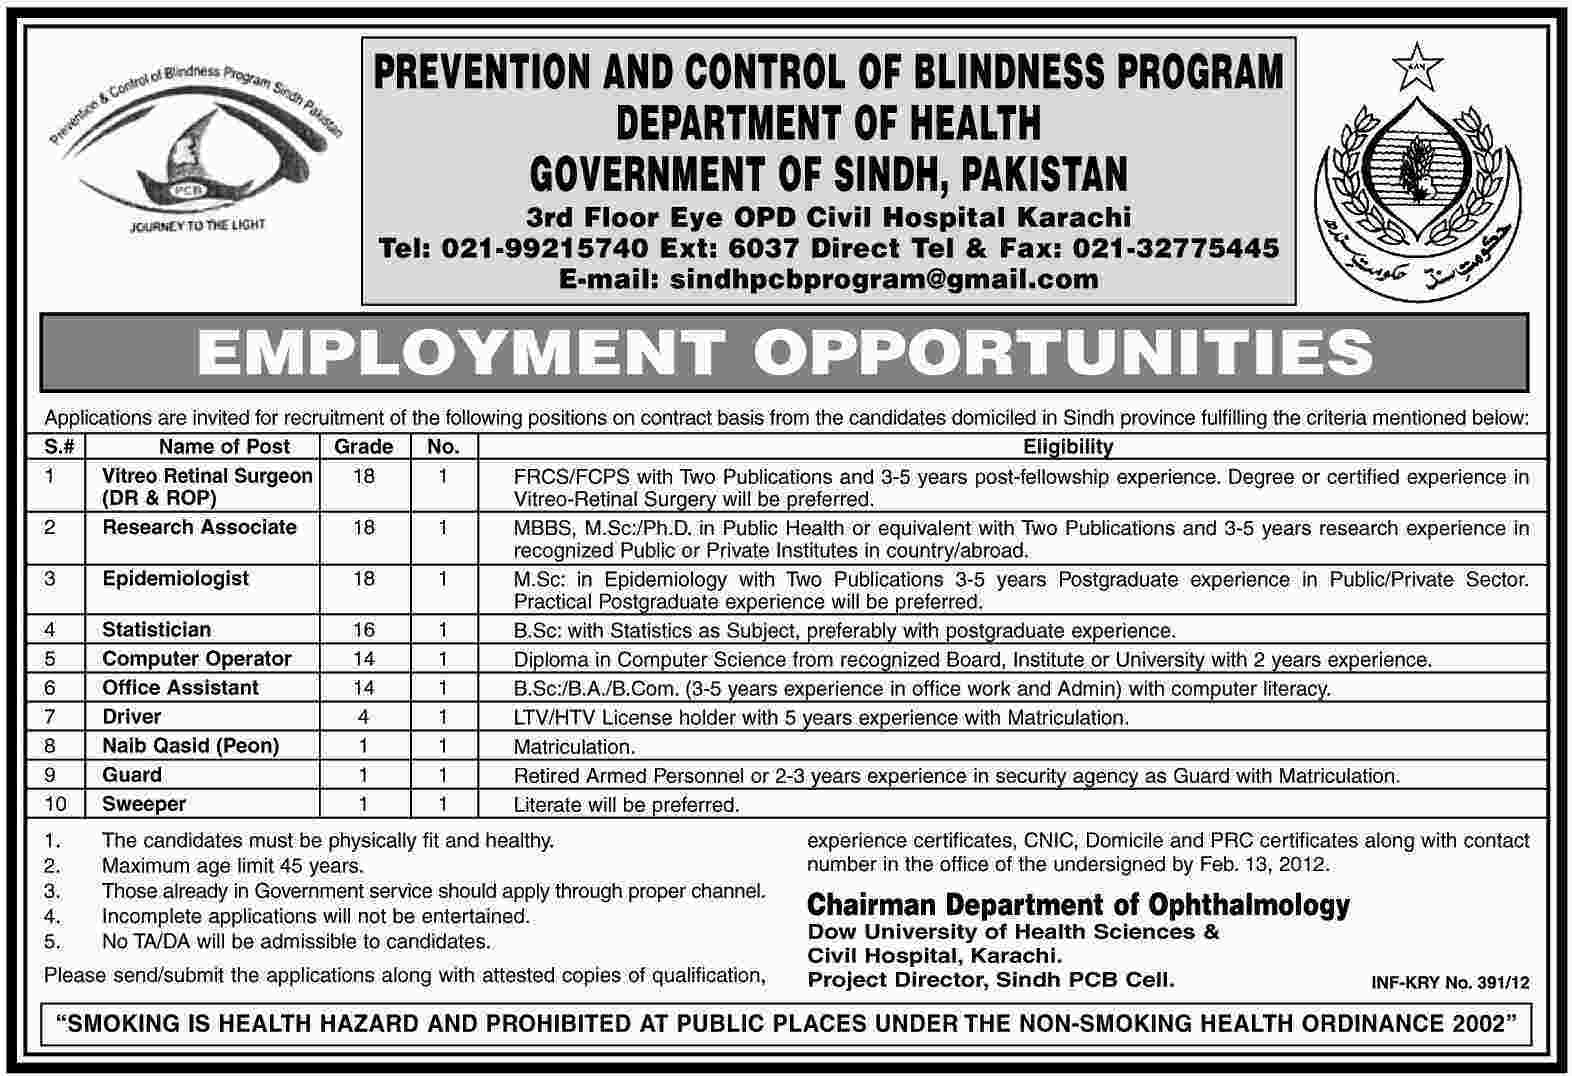 Prevention and Control of Blindness Program, Department of Health, Sindh Jobs Opportunity